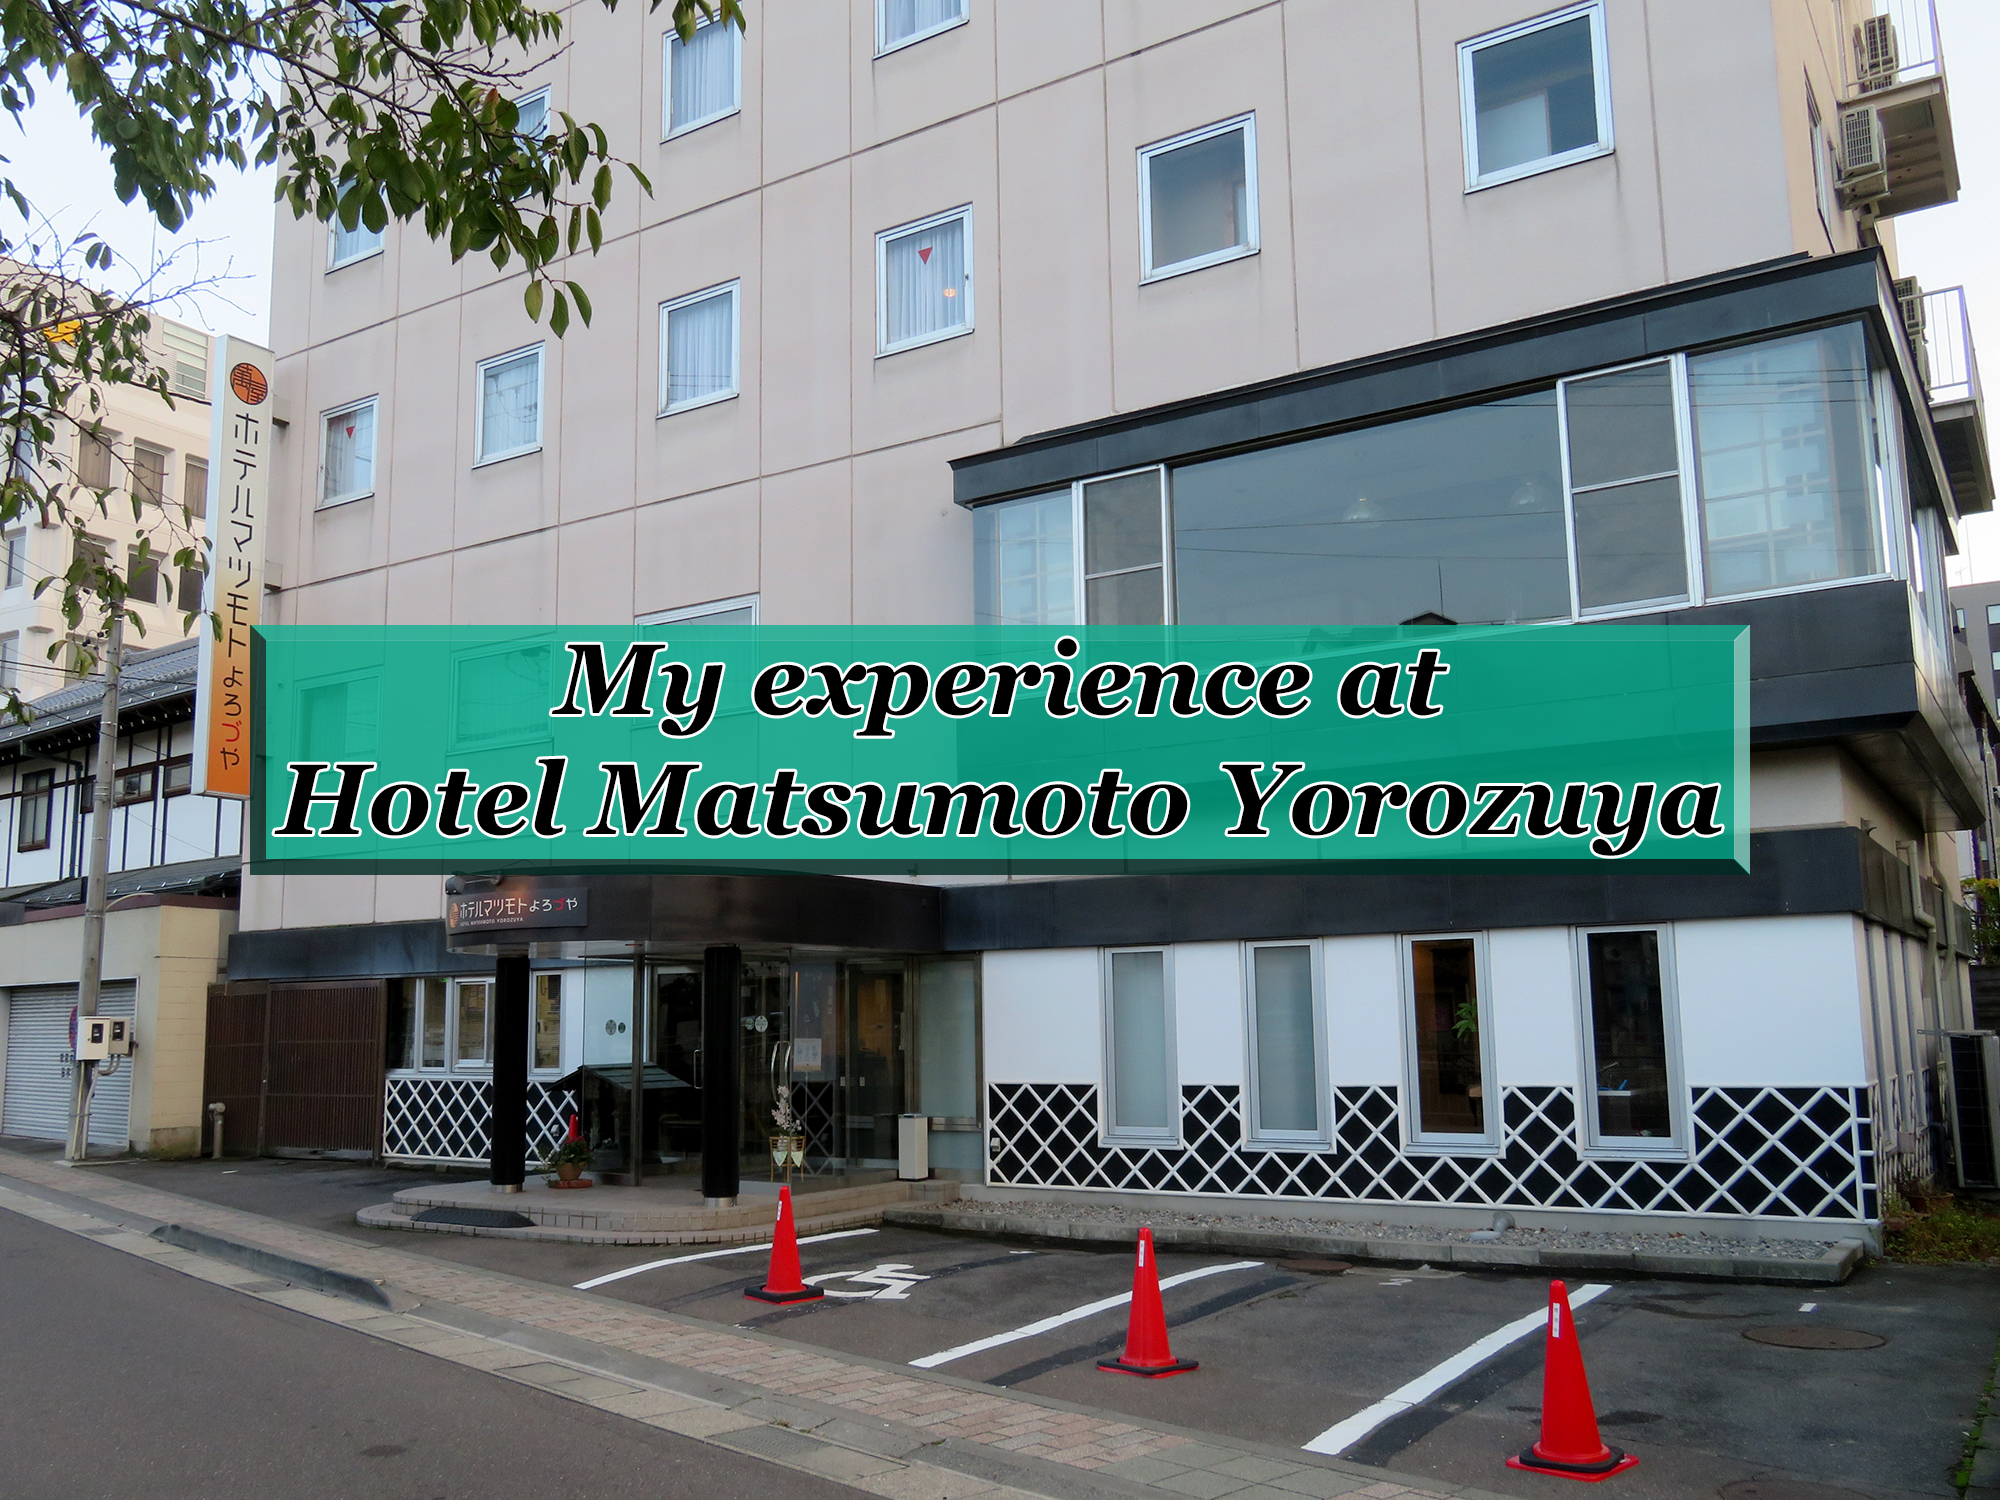 Exterior of a multiple-story building with text inside a green box that says, "My experience at Hotel Matsumoto Yorozuya."